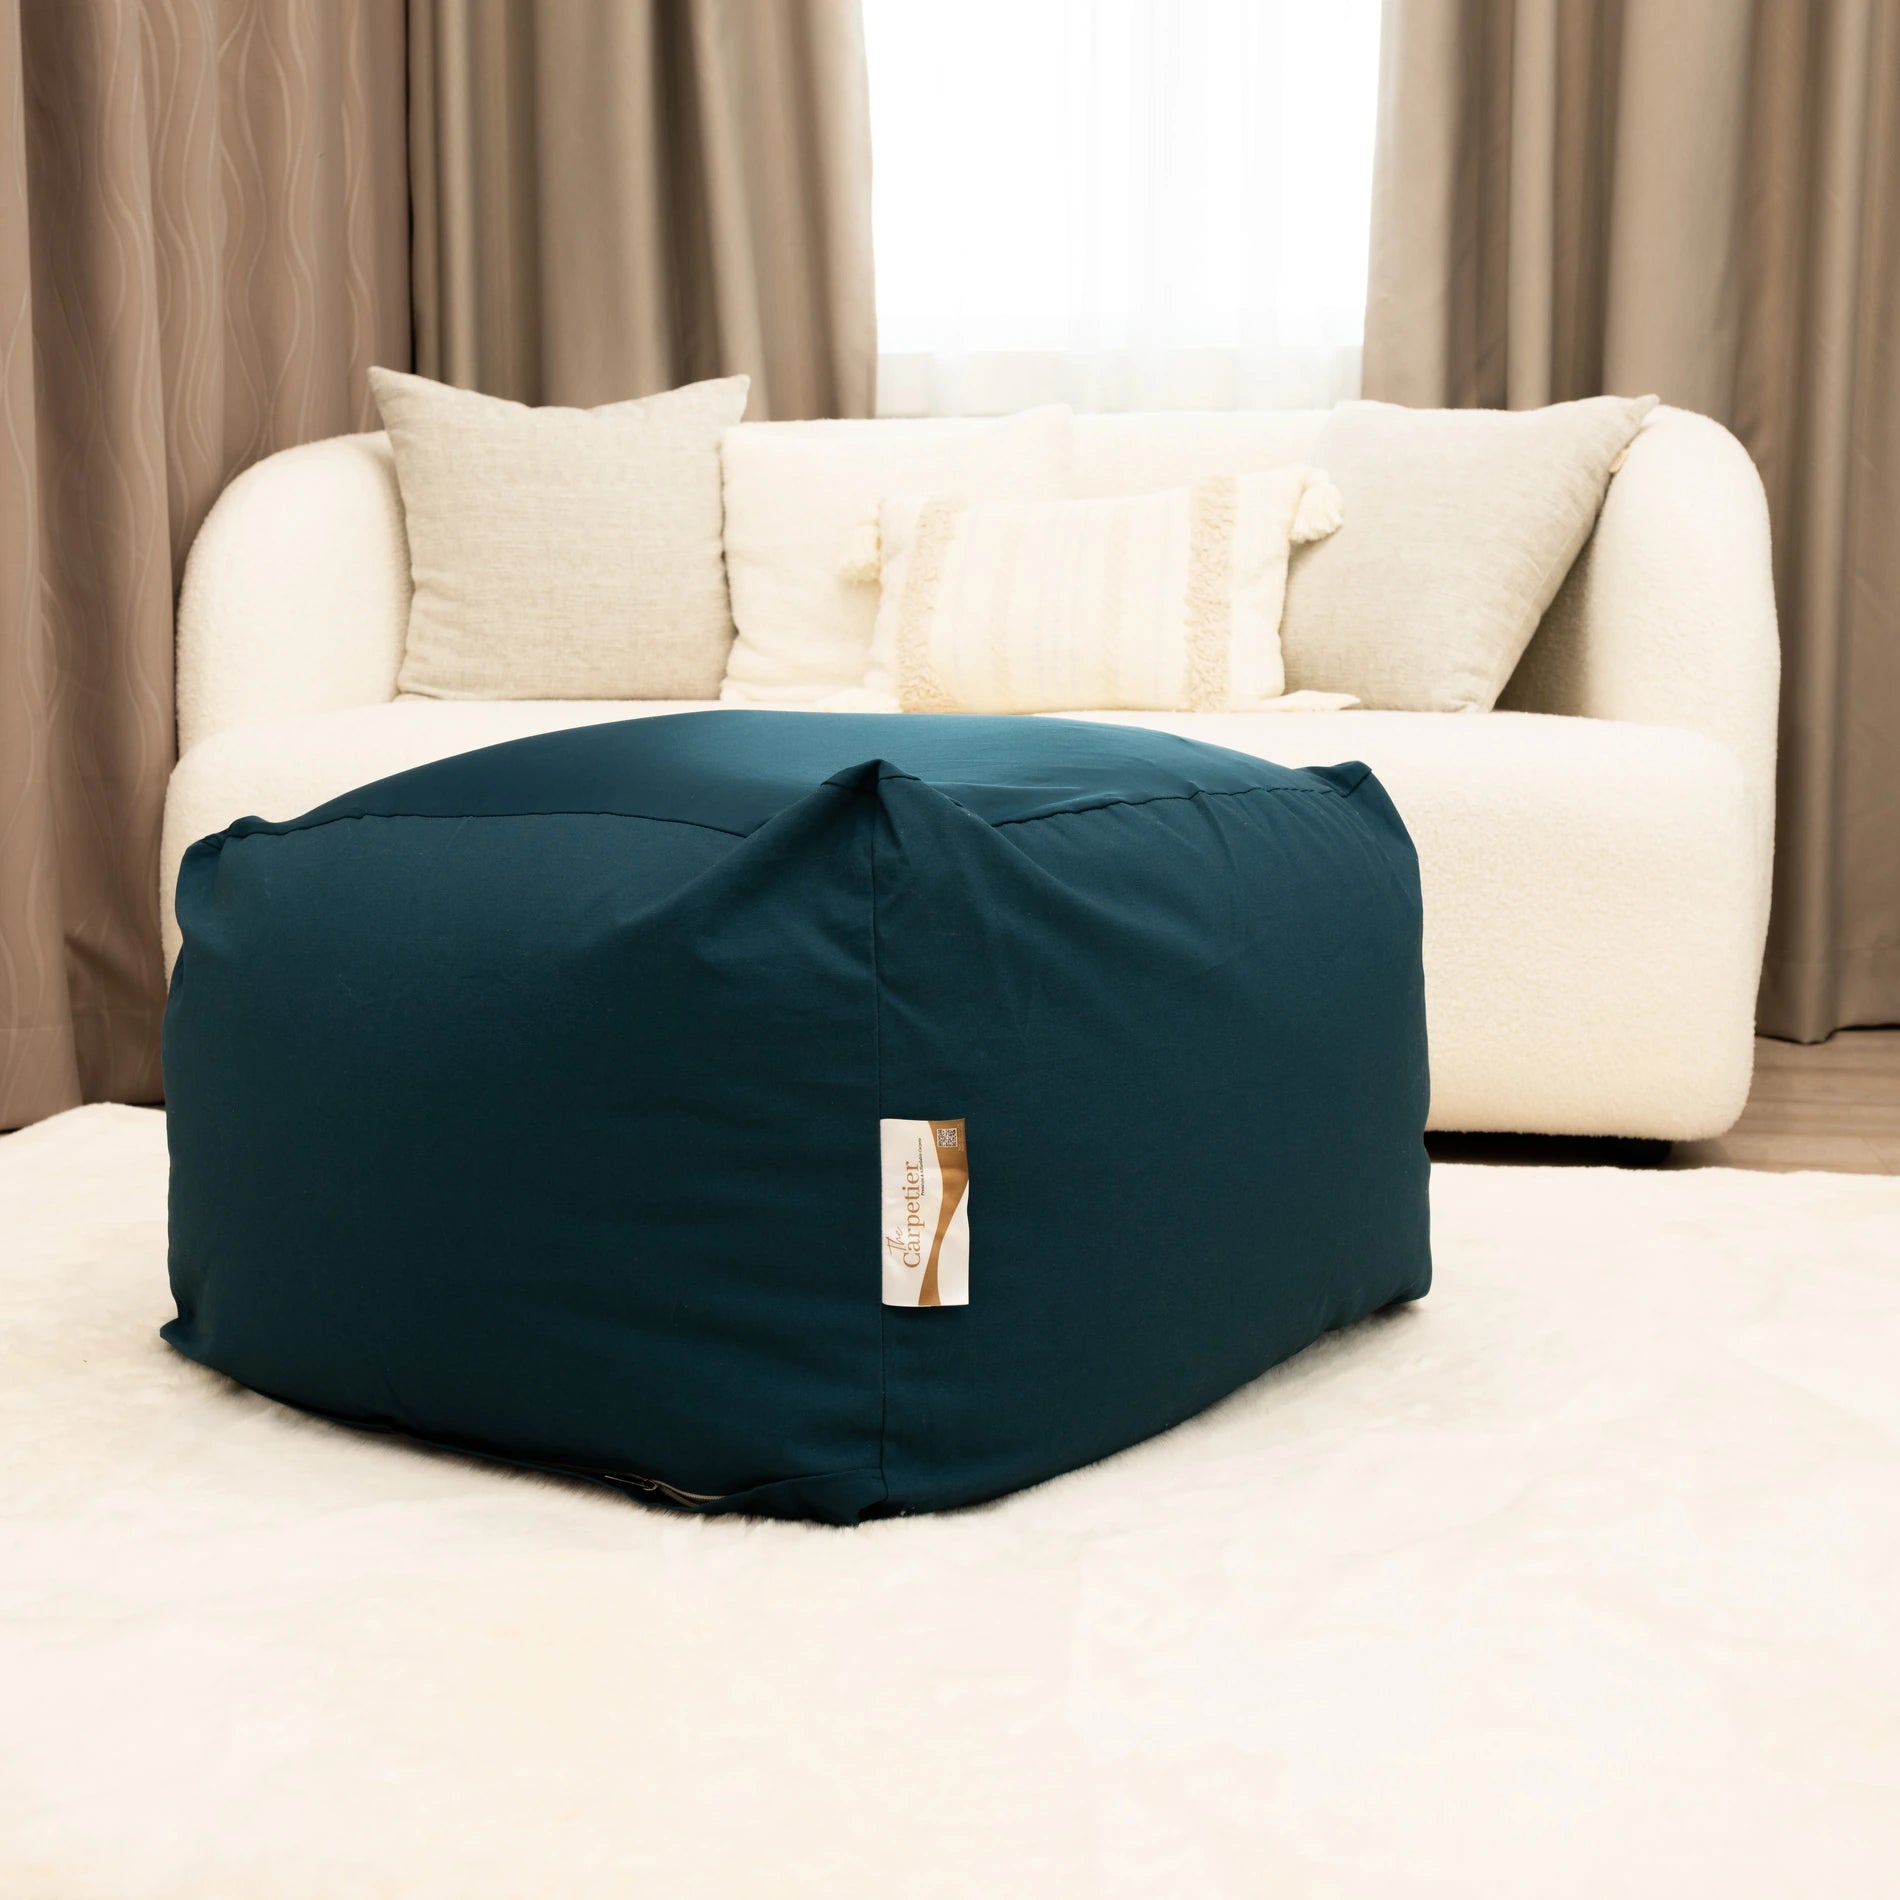 5 Best Bean Bag Chairs in Singapore 2023